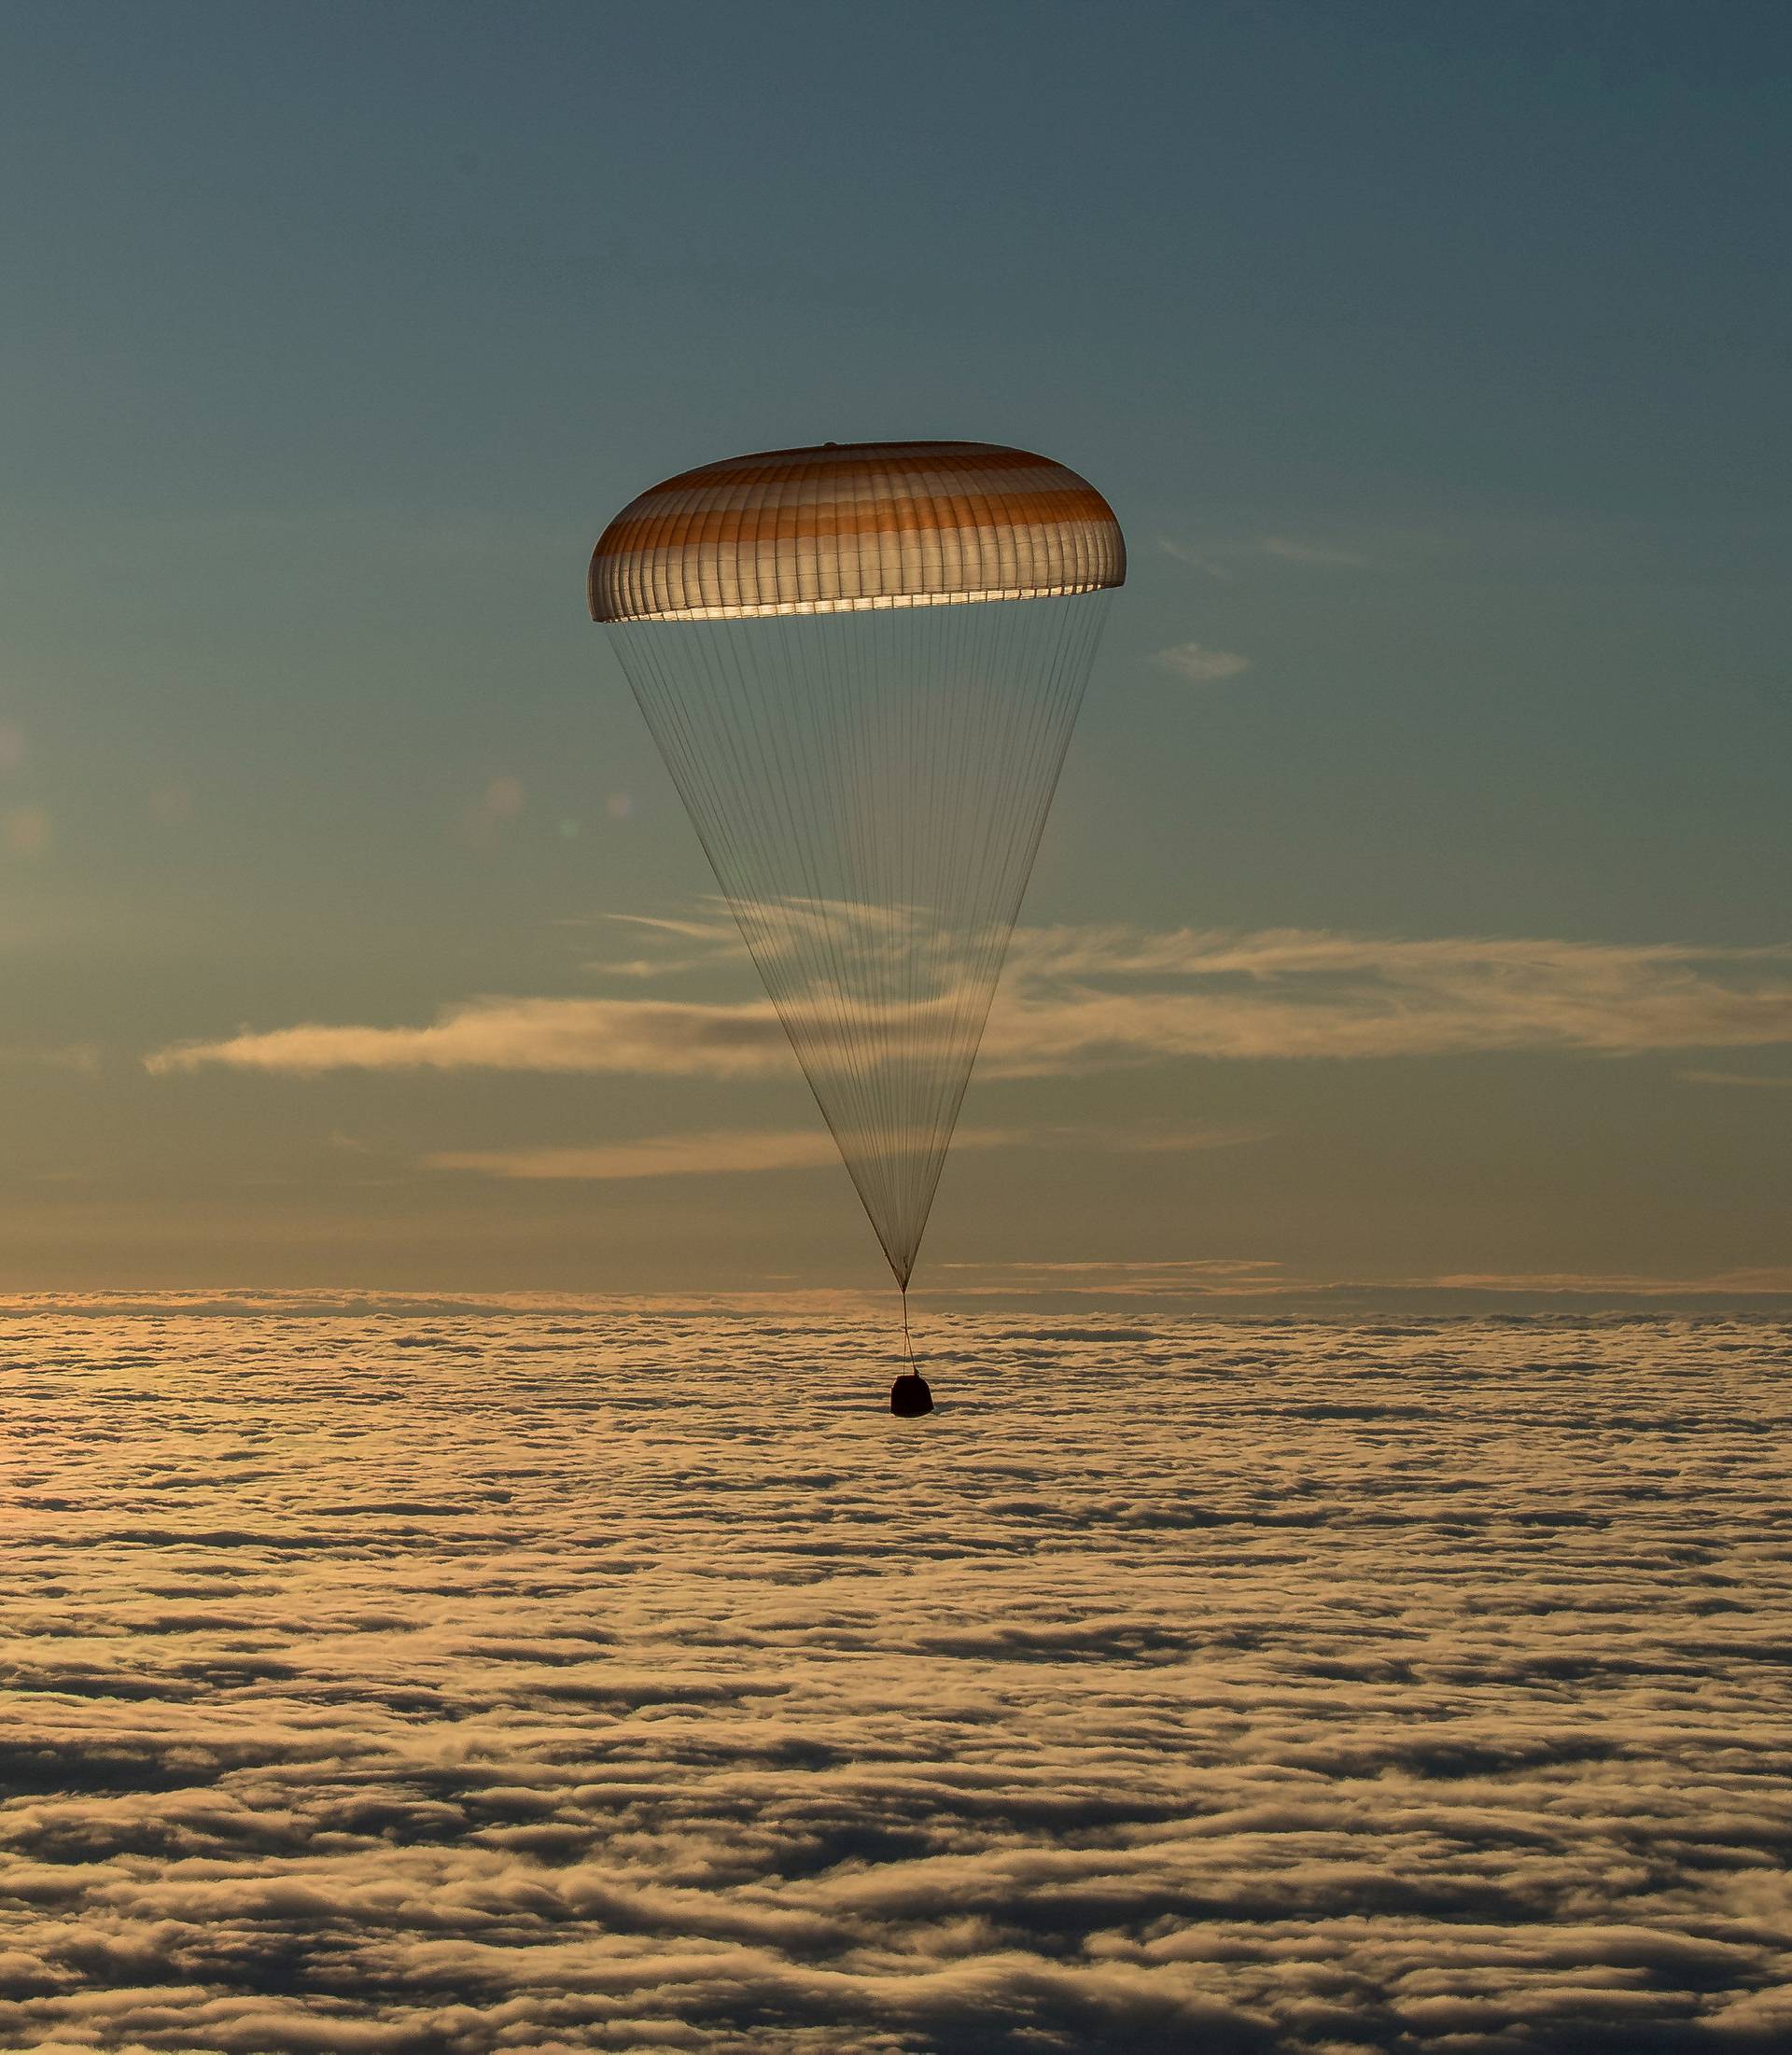 The Soyuz MS-06 capsule carrying the crew of Acaba and Vande Hei of the U.S., and Misurkin of Russia descends beneath a parachute just before landing in a remote area outside the town of Dzhezkazgan